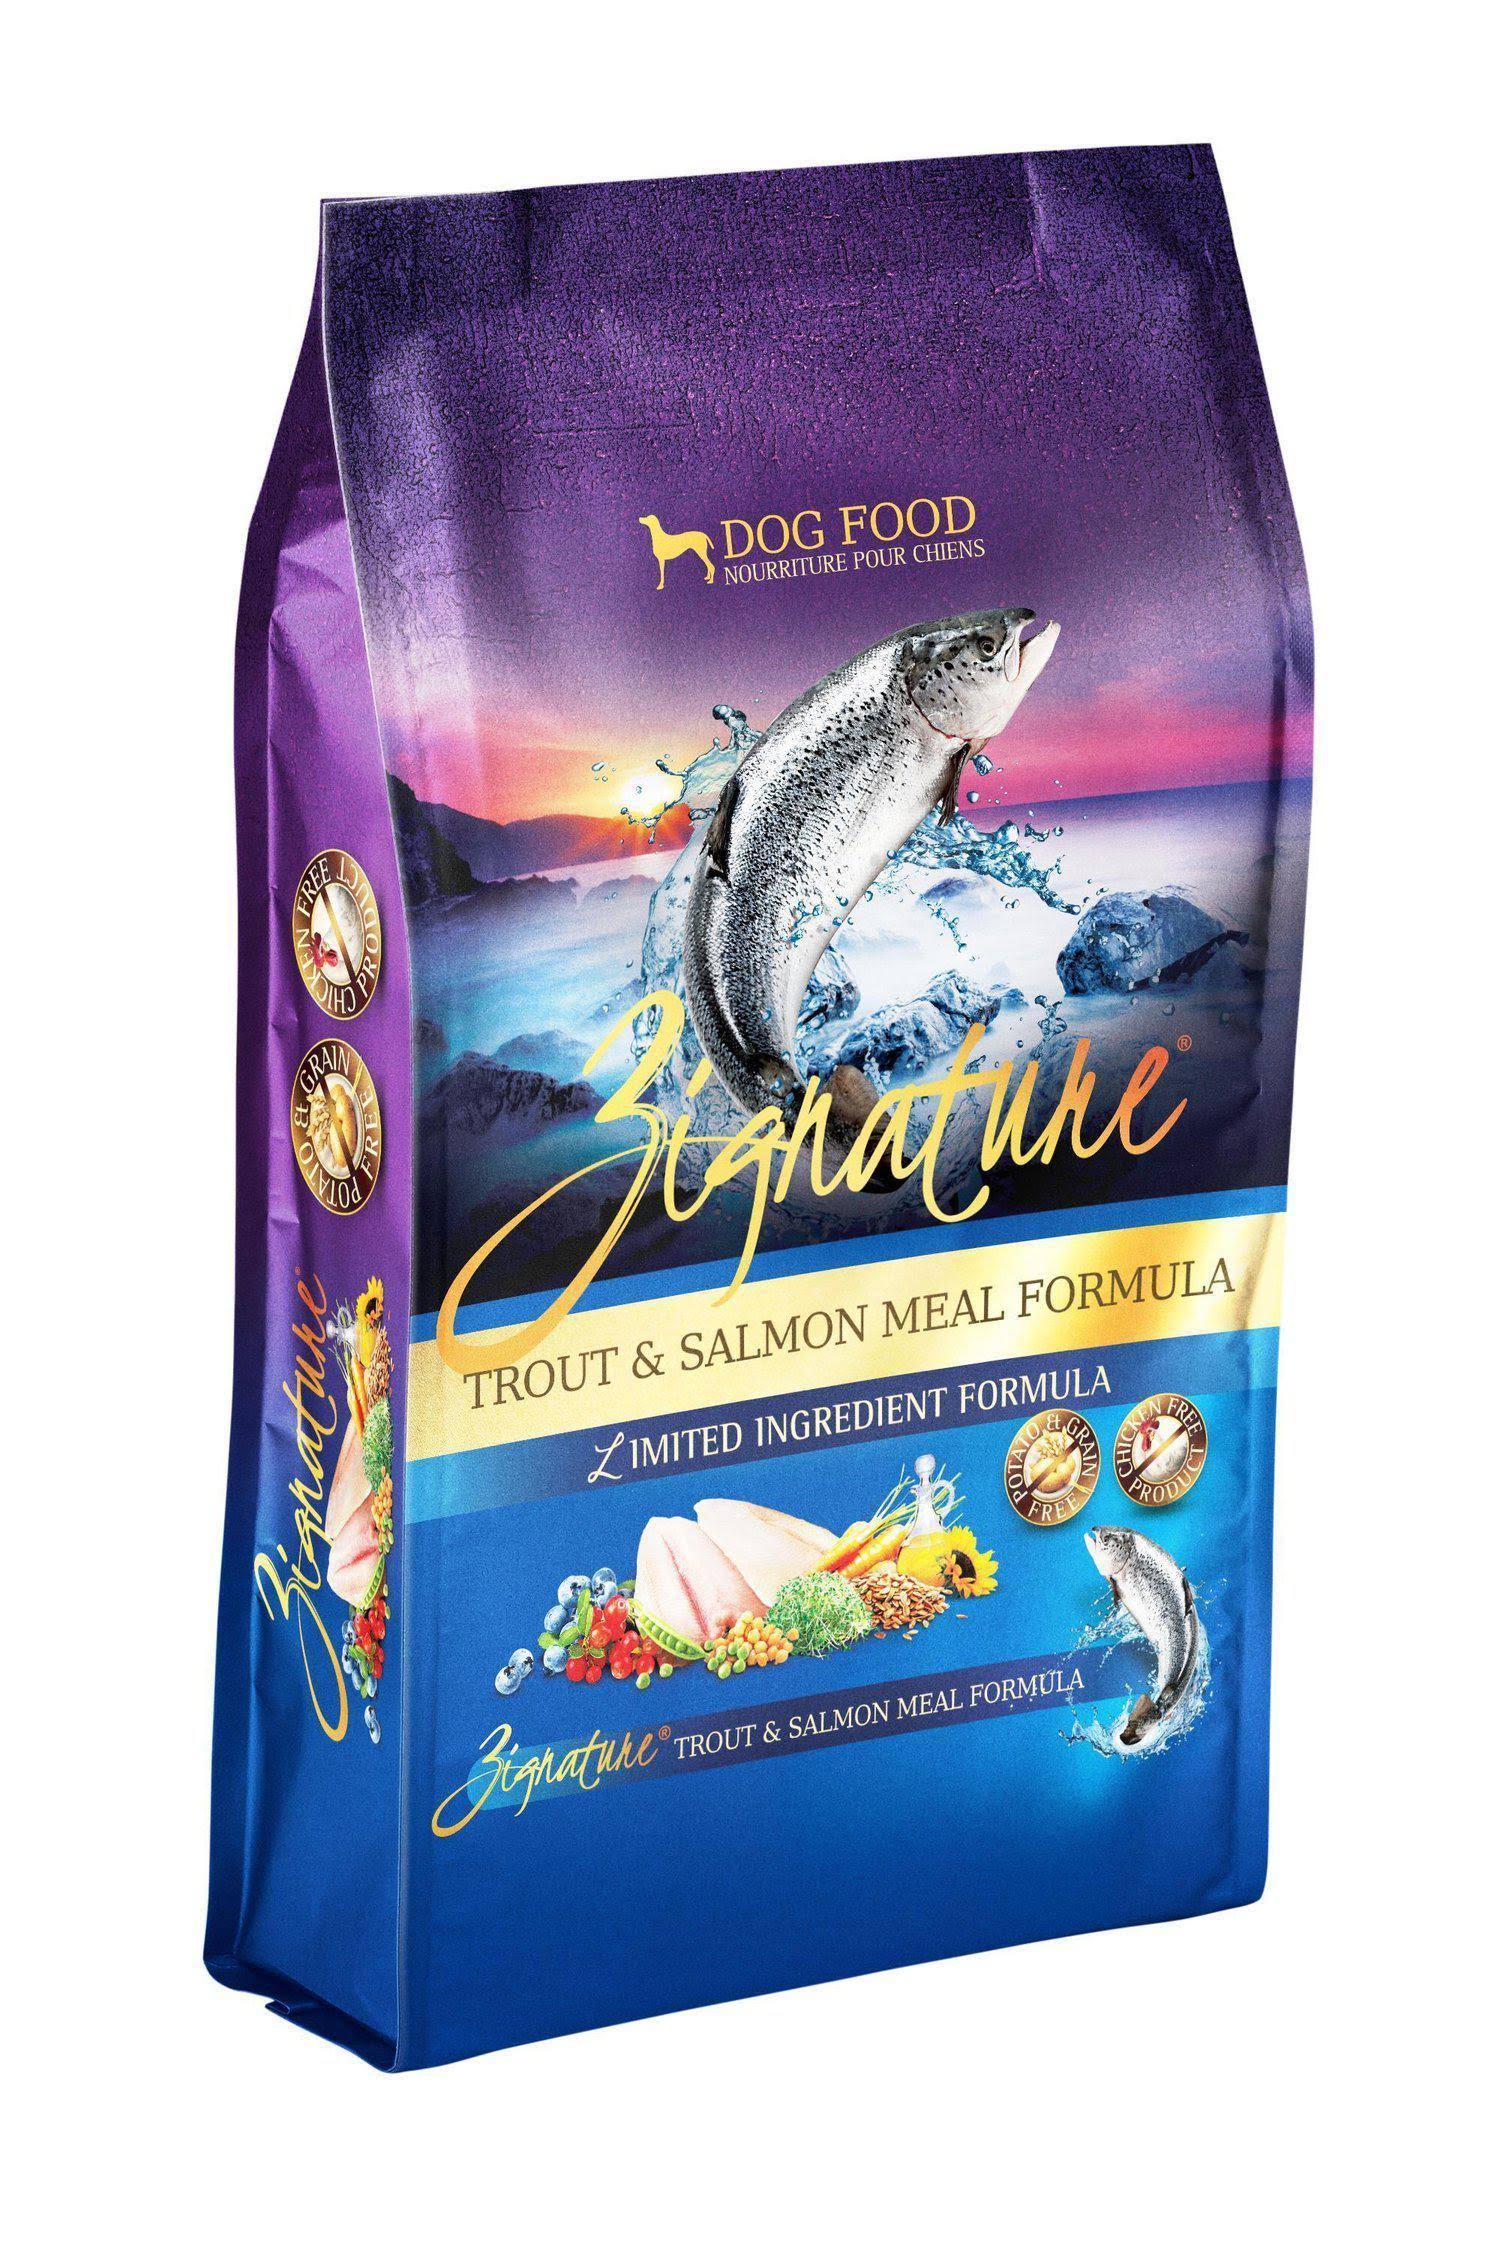 Zignature Dog Food - Dry, Trout and Salmon Meal Formula, 13.5lb